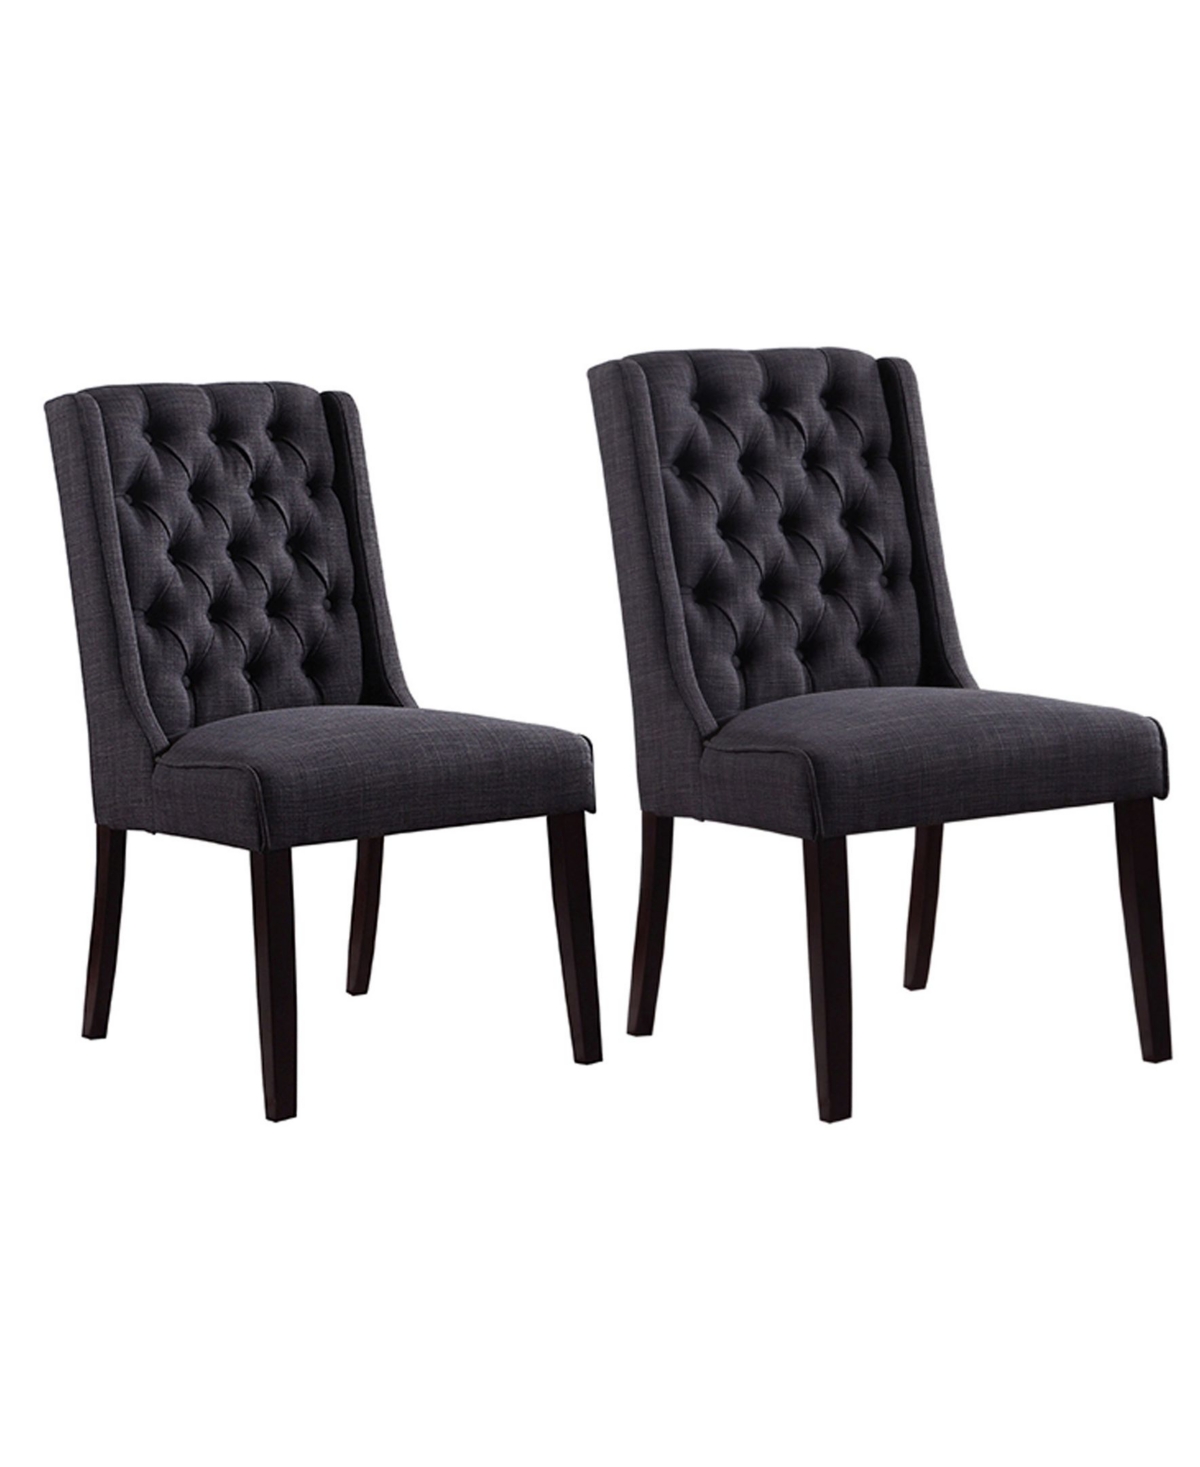 Best Master Furniture Newport Upholstered Side Chairs With Tufted Back, Set Of 2 In Charcoal